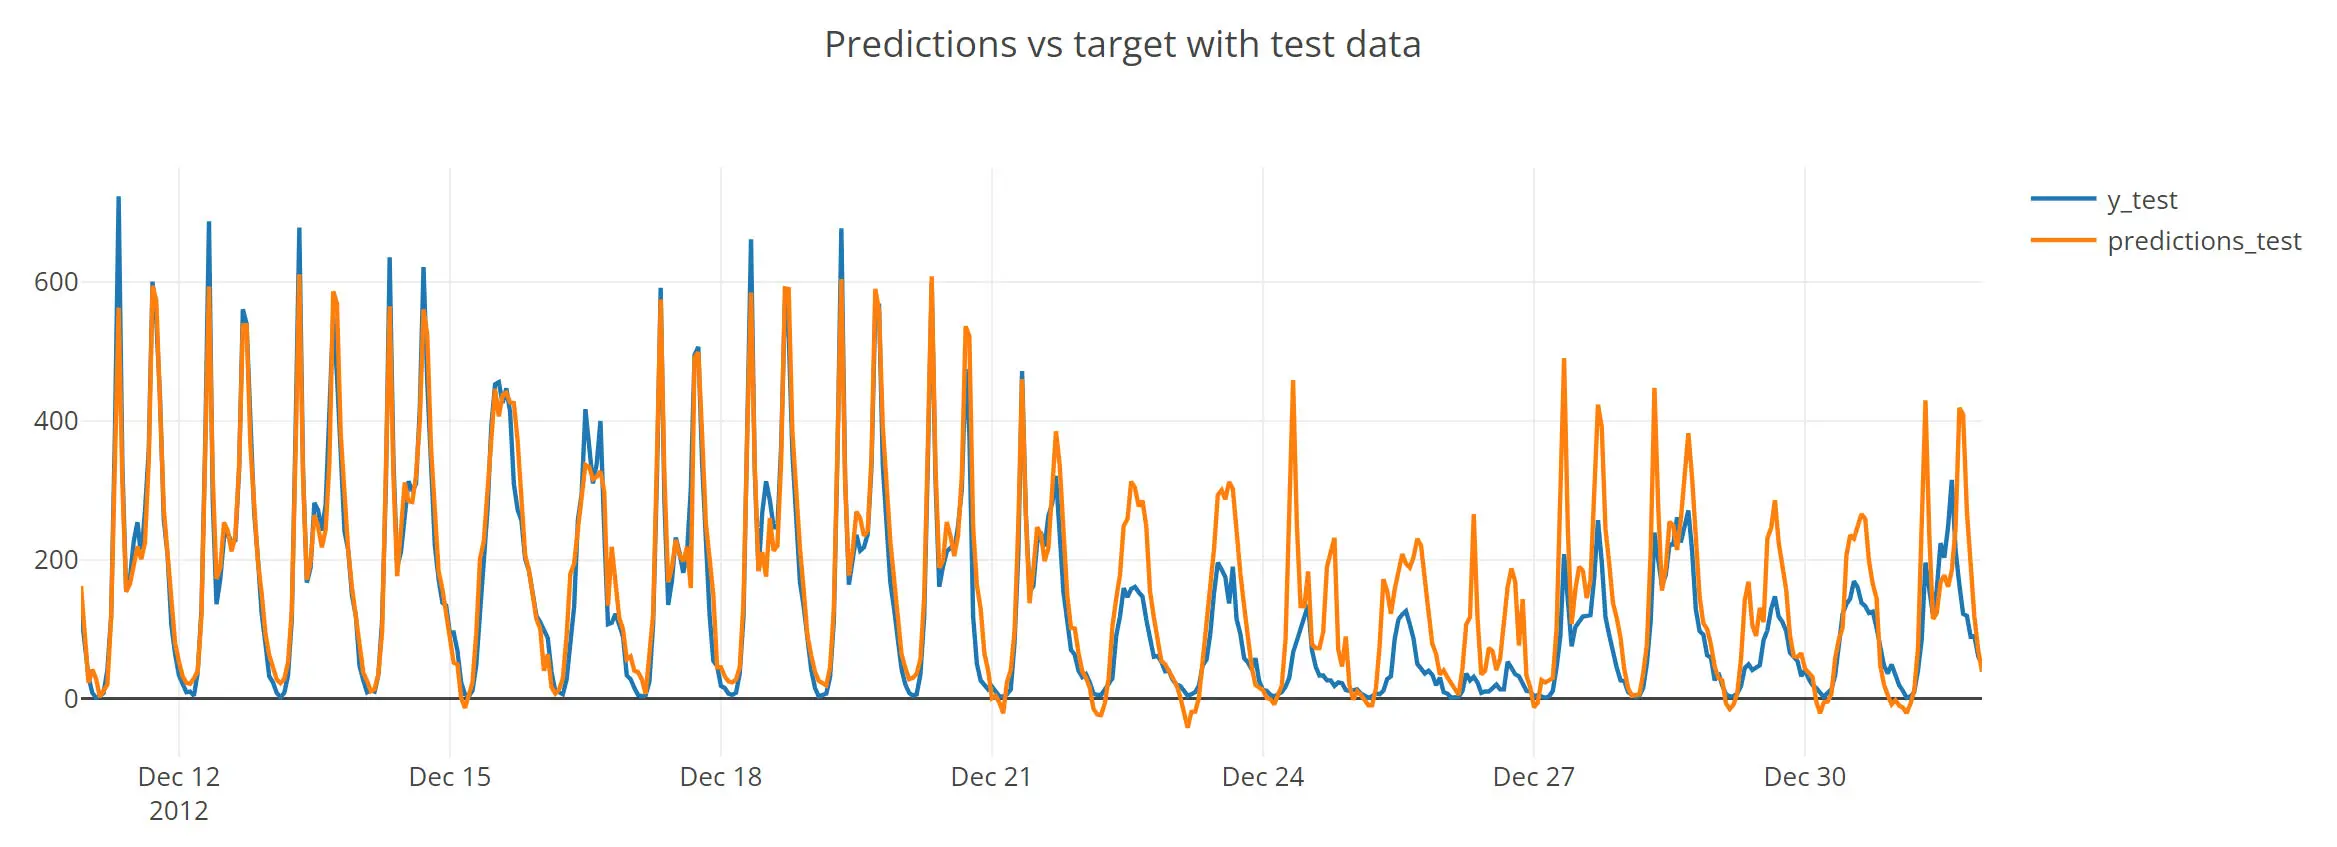 Predictions vs target with test data